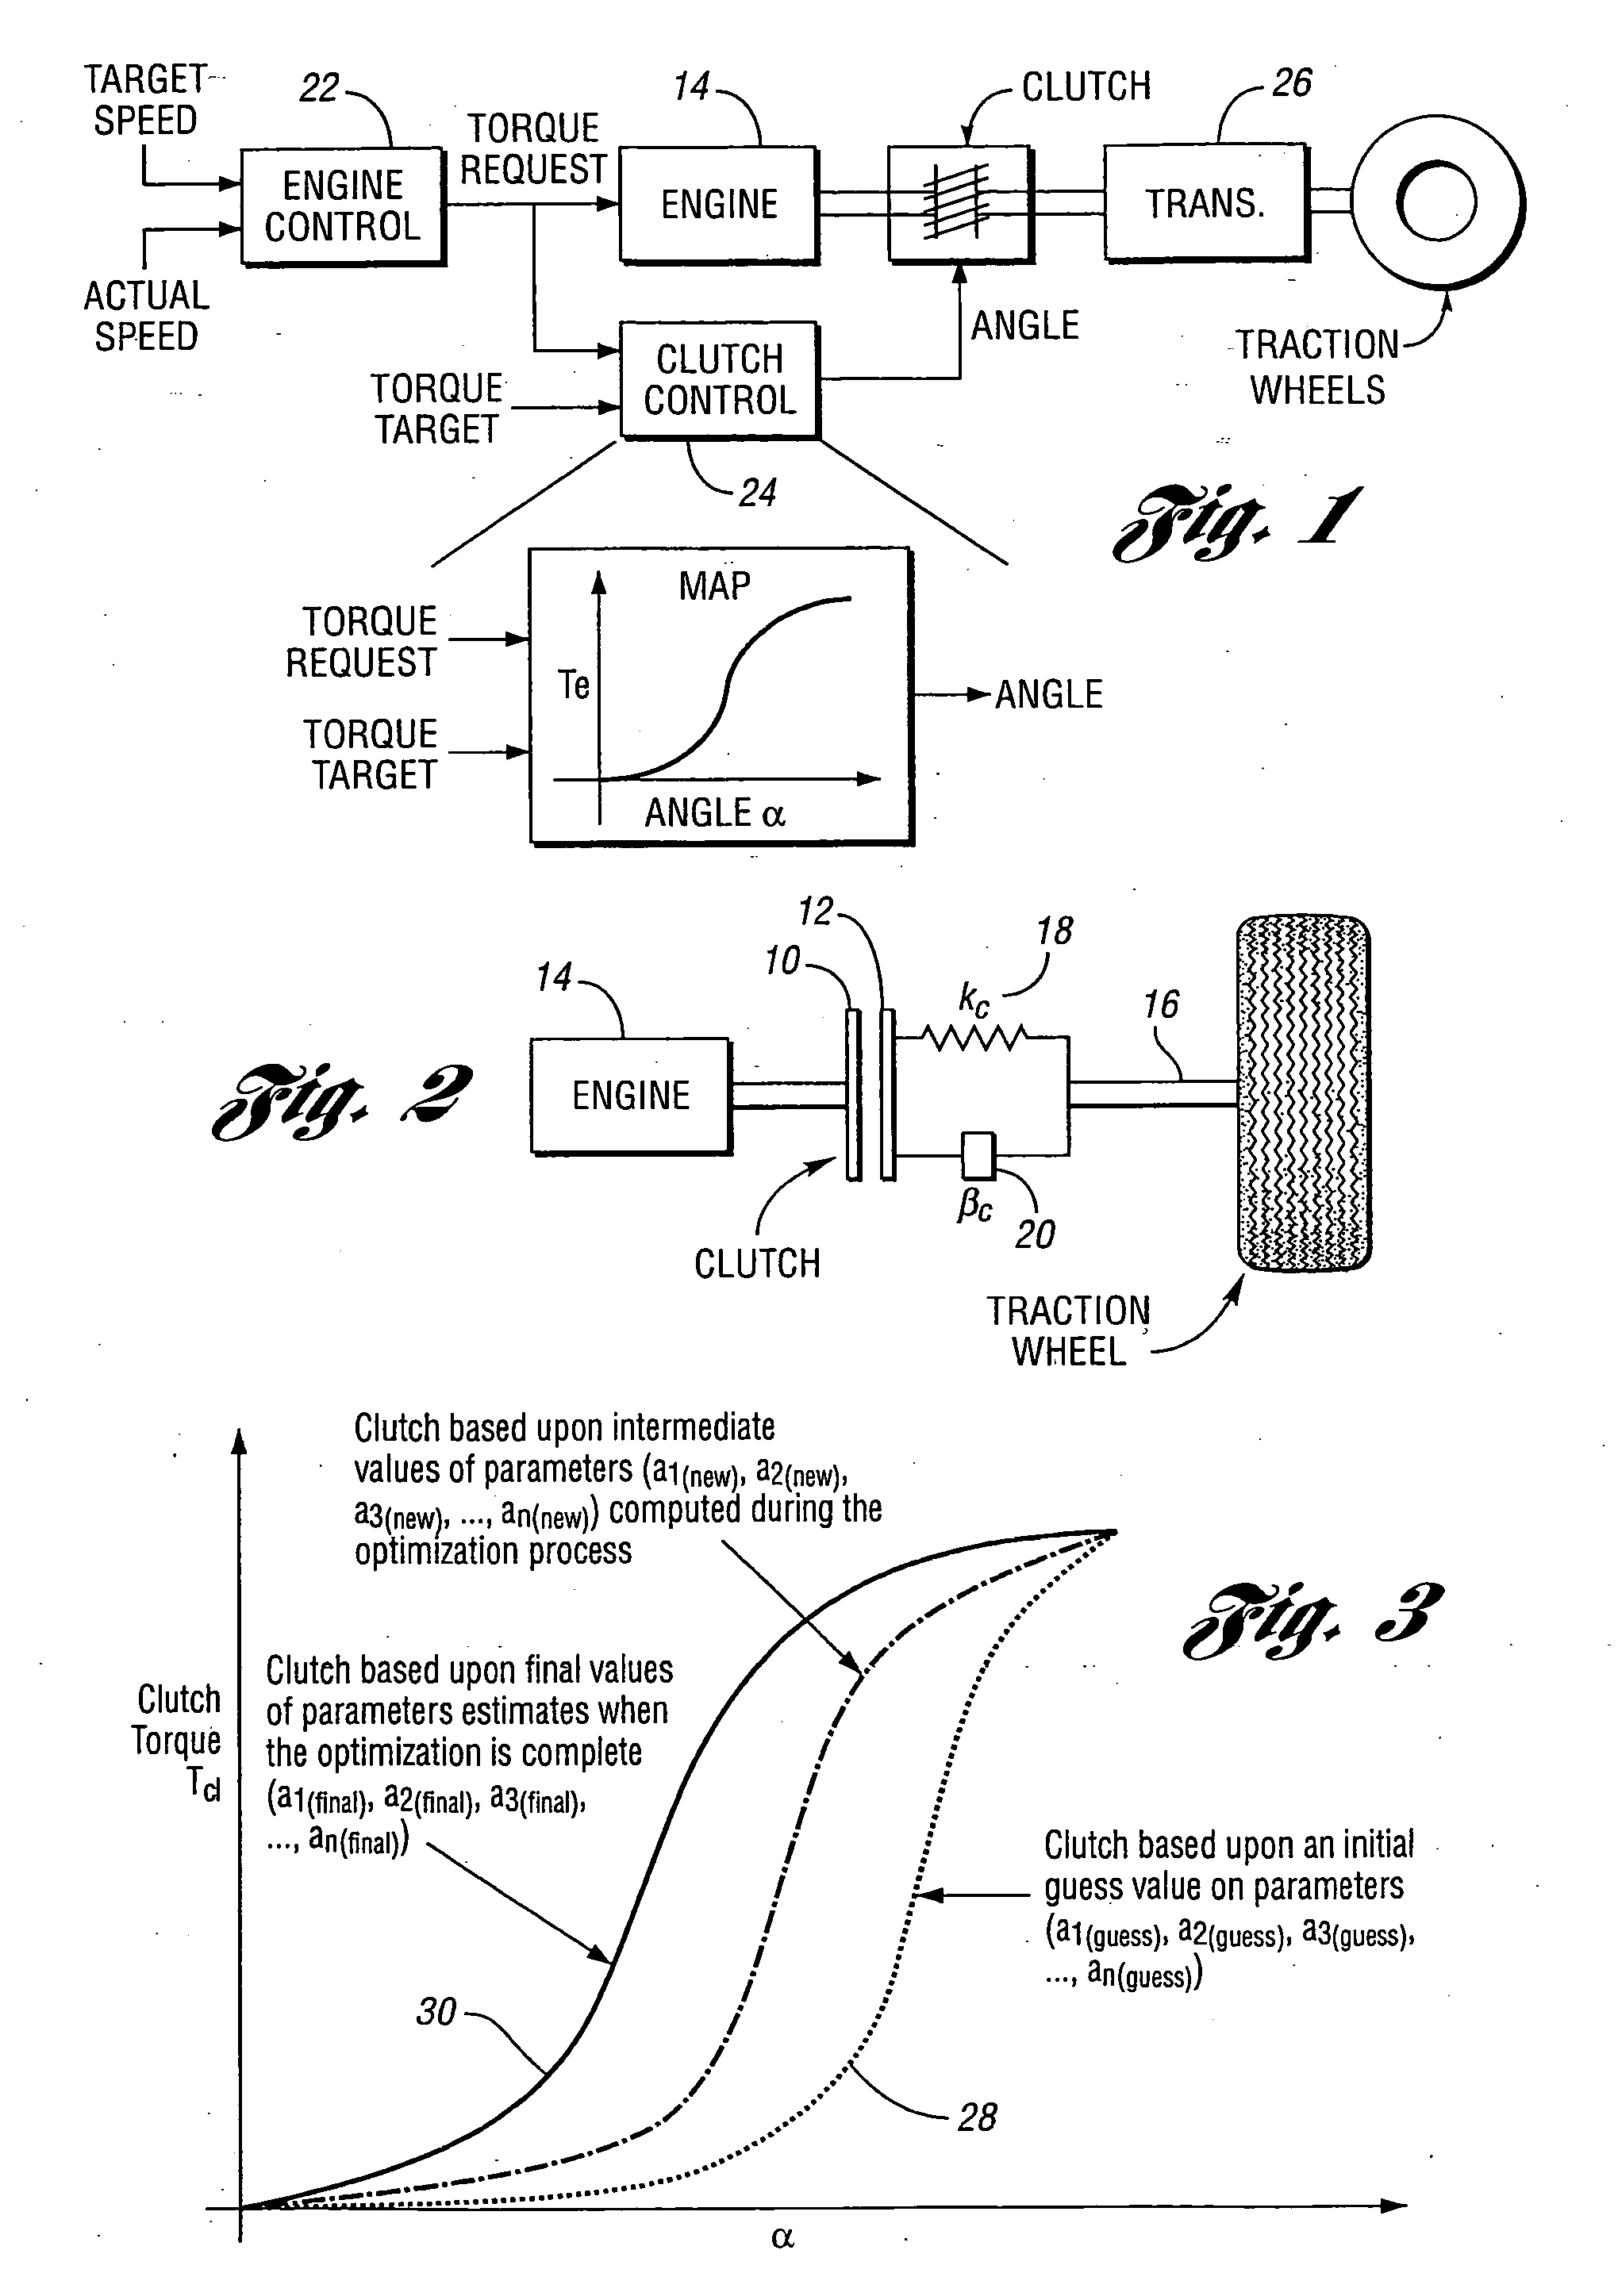 Method for estimating clutch engagement parameters in a strategy for clutch management in a vehicle powertrain